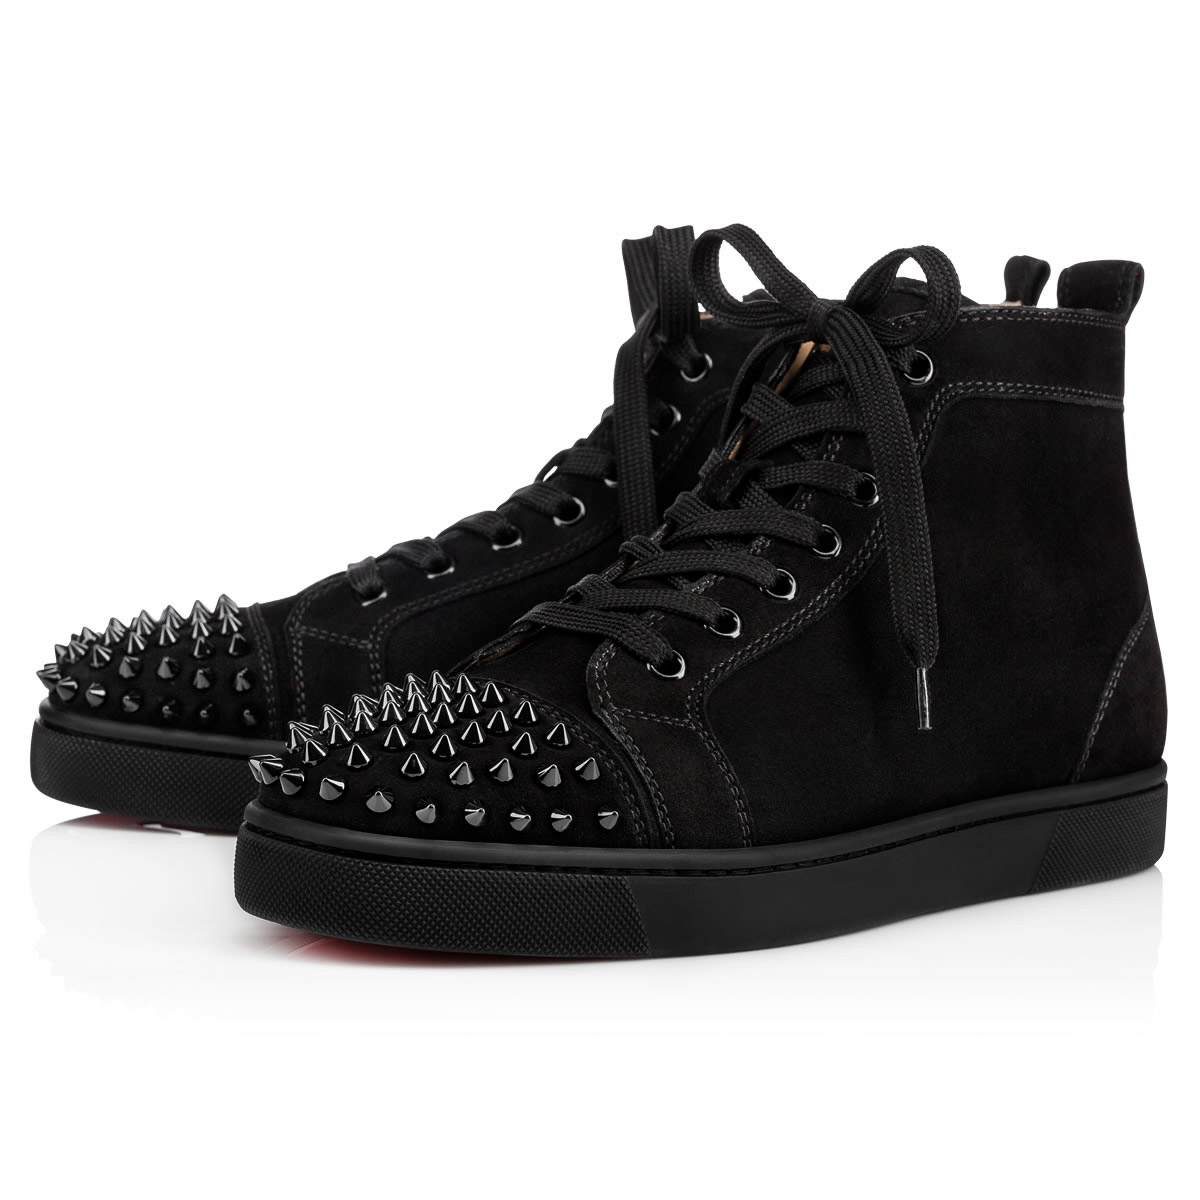 Lou Spikes - Sneakers - Suede calf and spikes - - Christian Louboutin